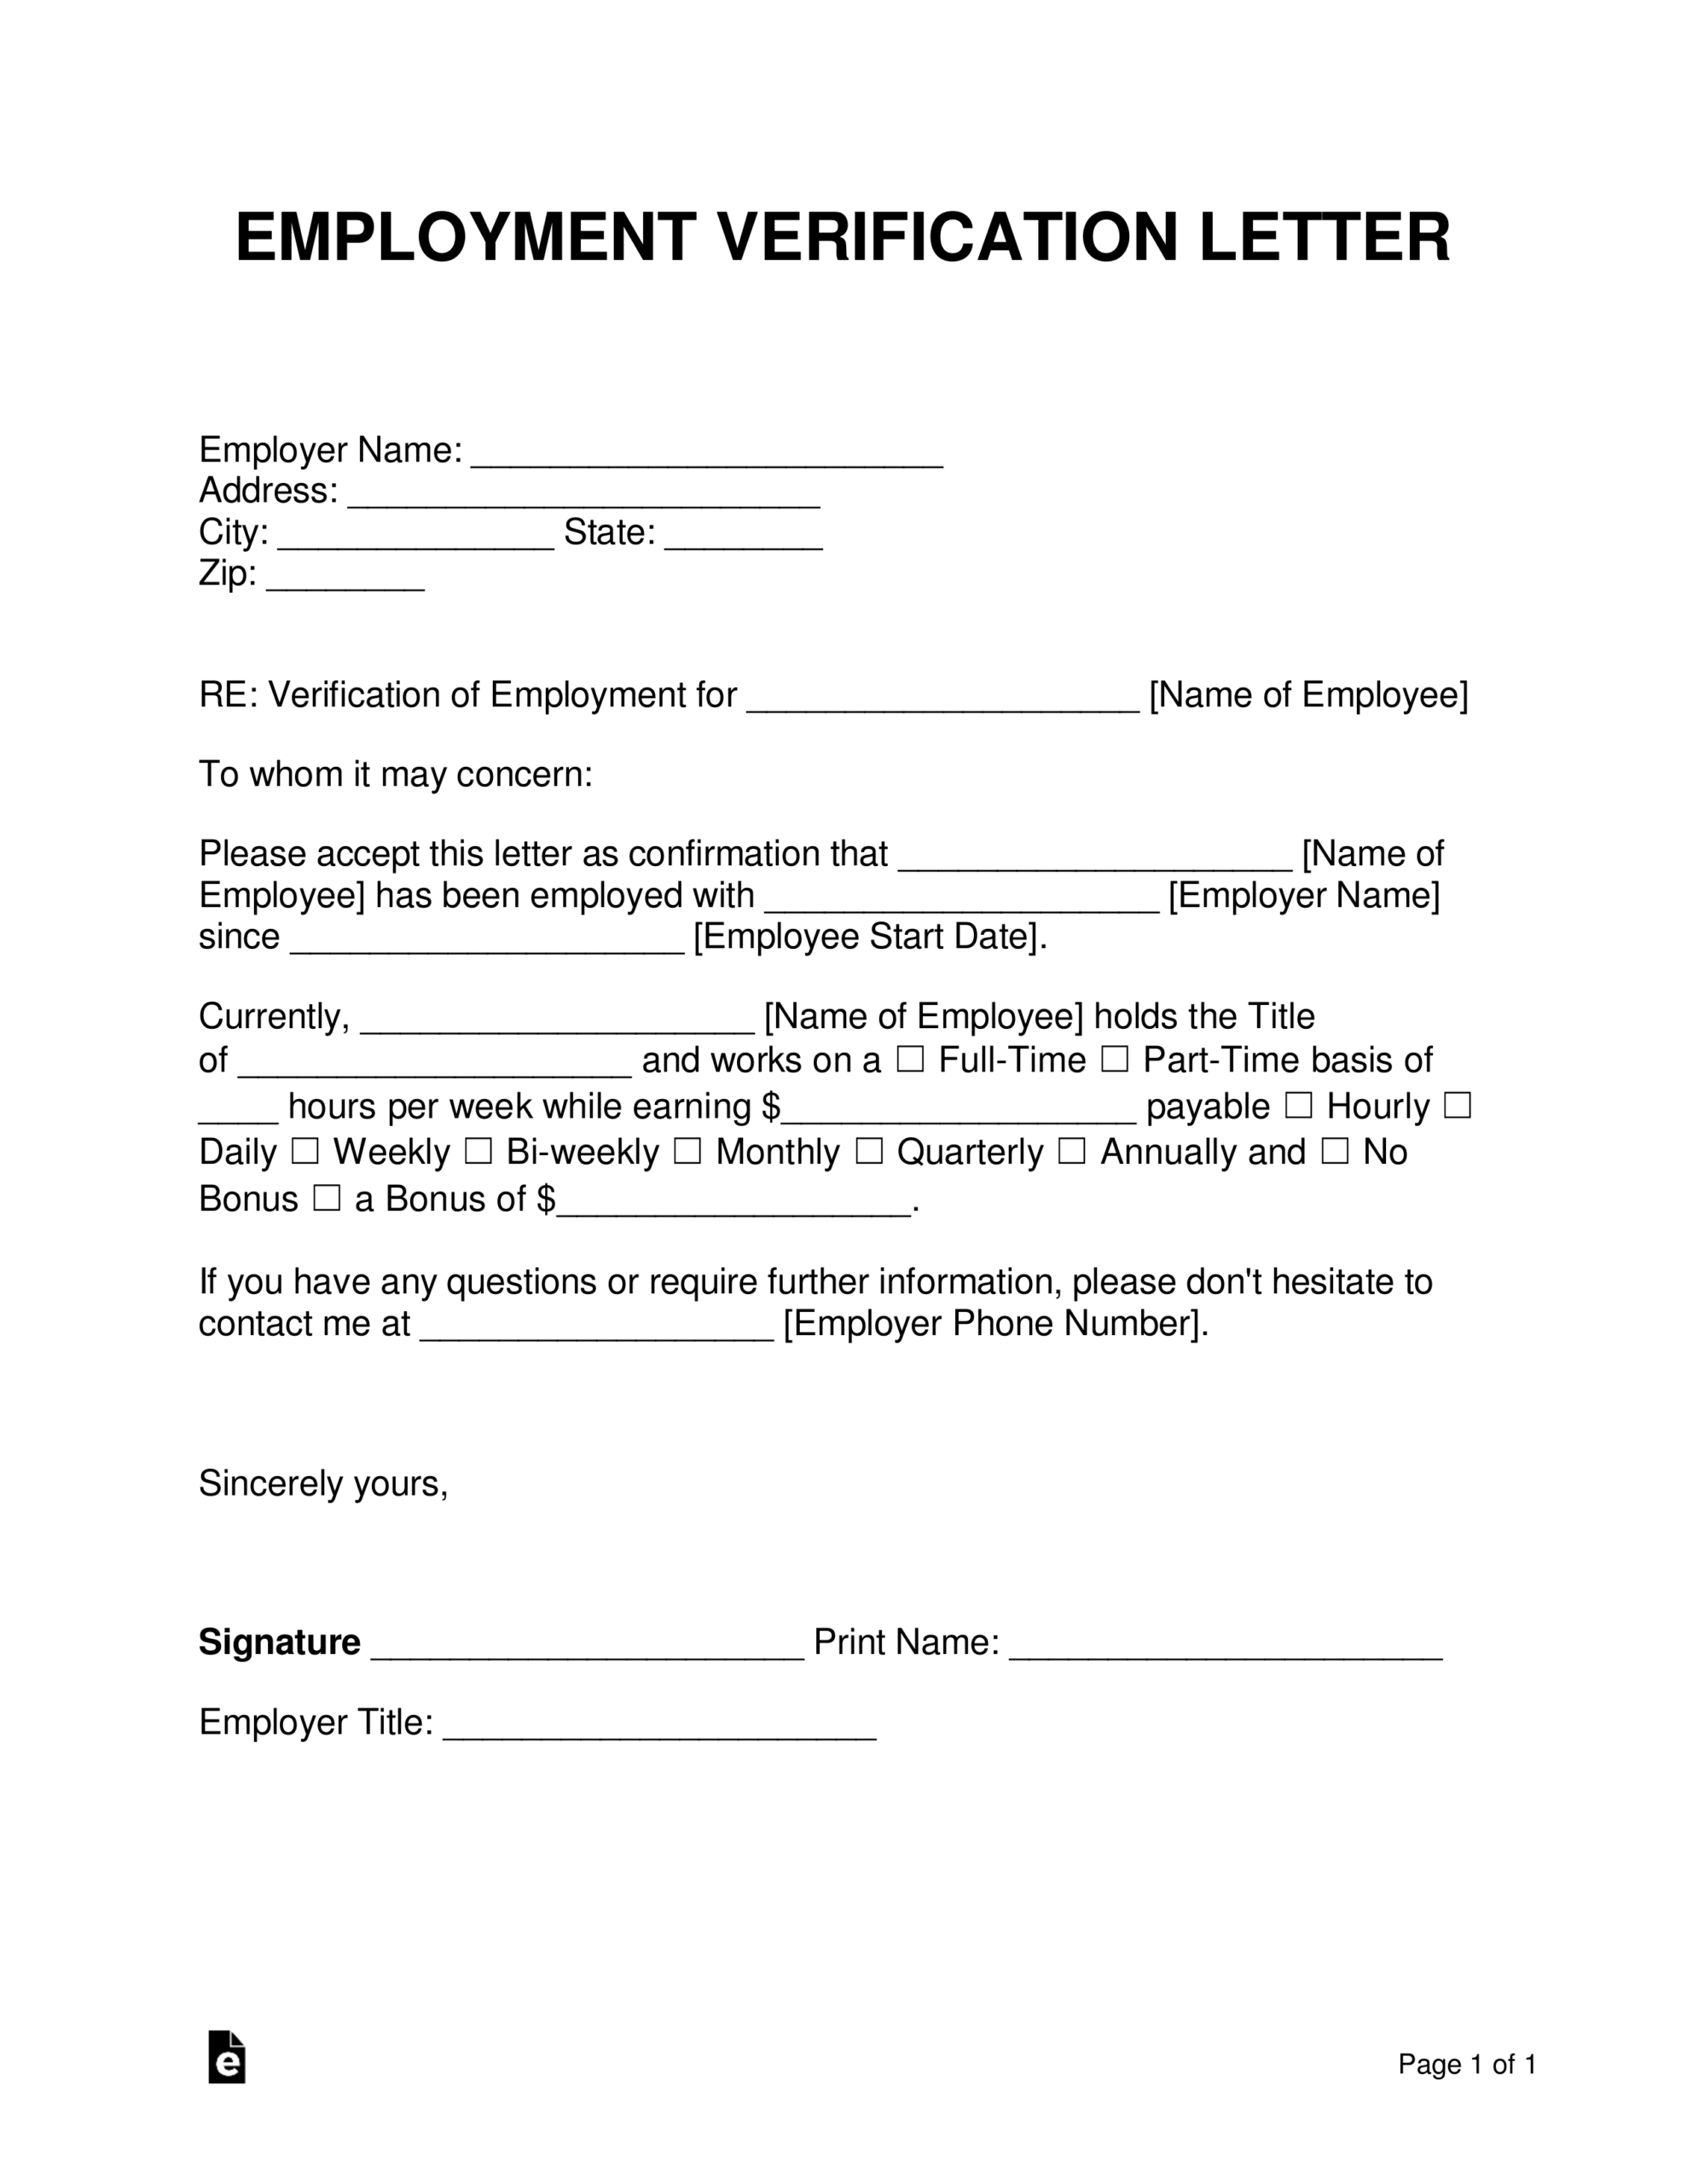 Letter Of Employment Verification From Employer - Calep For Employment Verification Letter Template Word